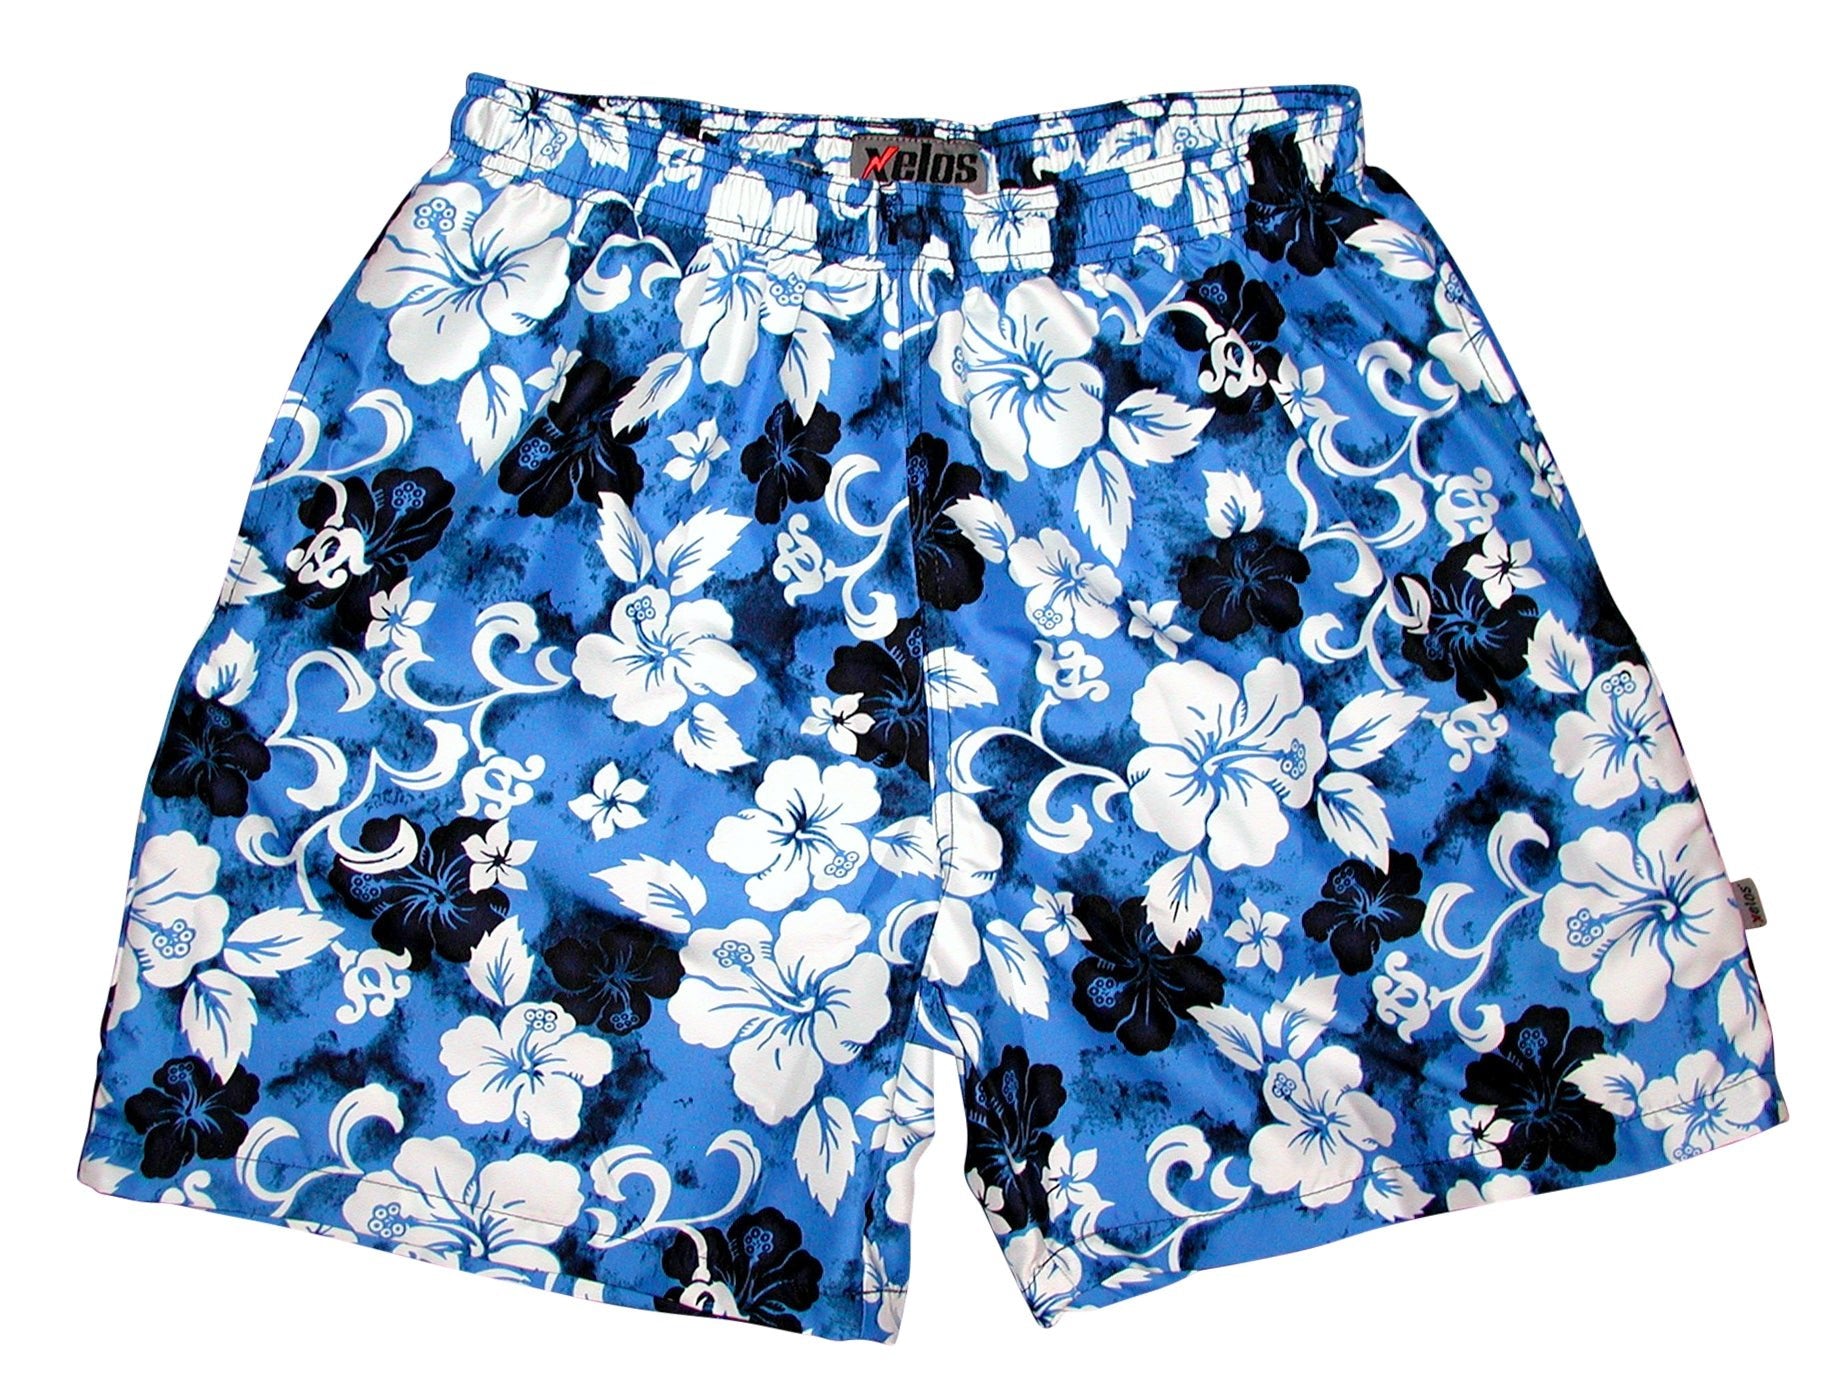 "Jungle Boogie" (Blue) Swim Trunks (with mesh liner / side pockets) - 6.5" Mid Length - Board Shorts World Outlet